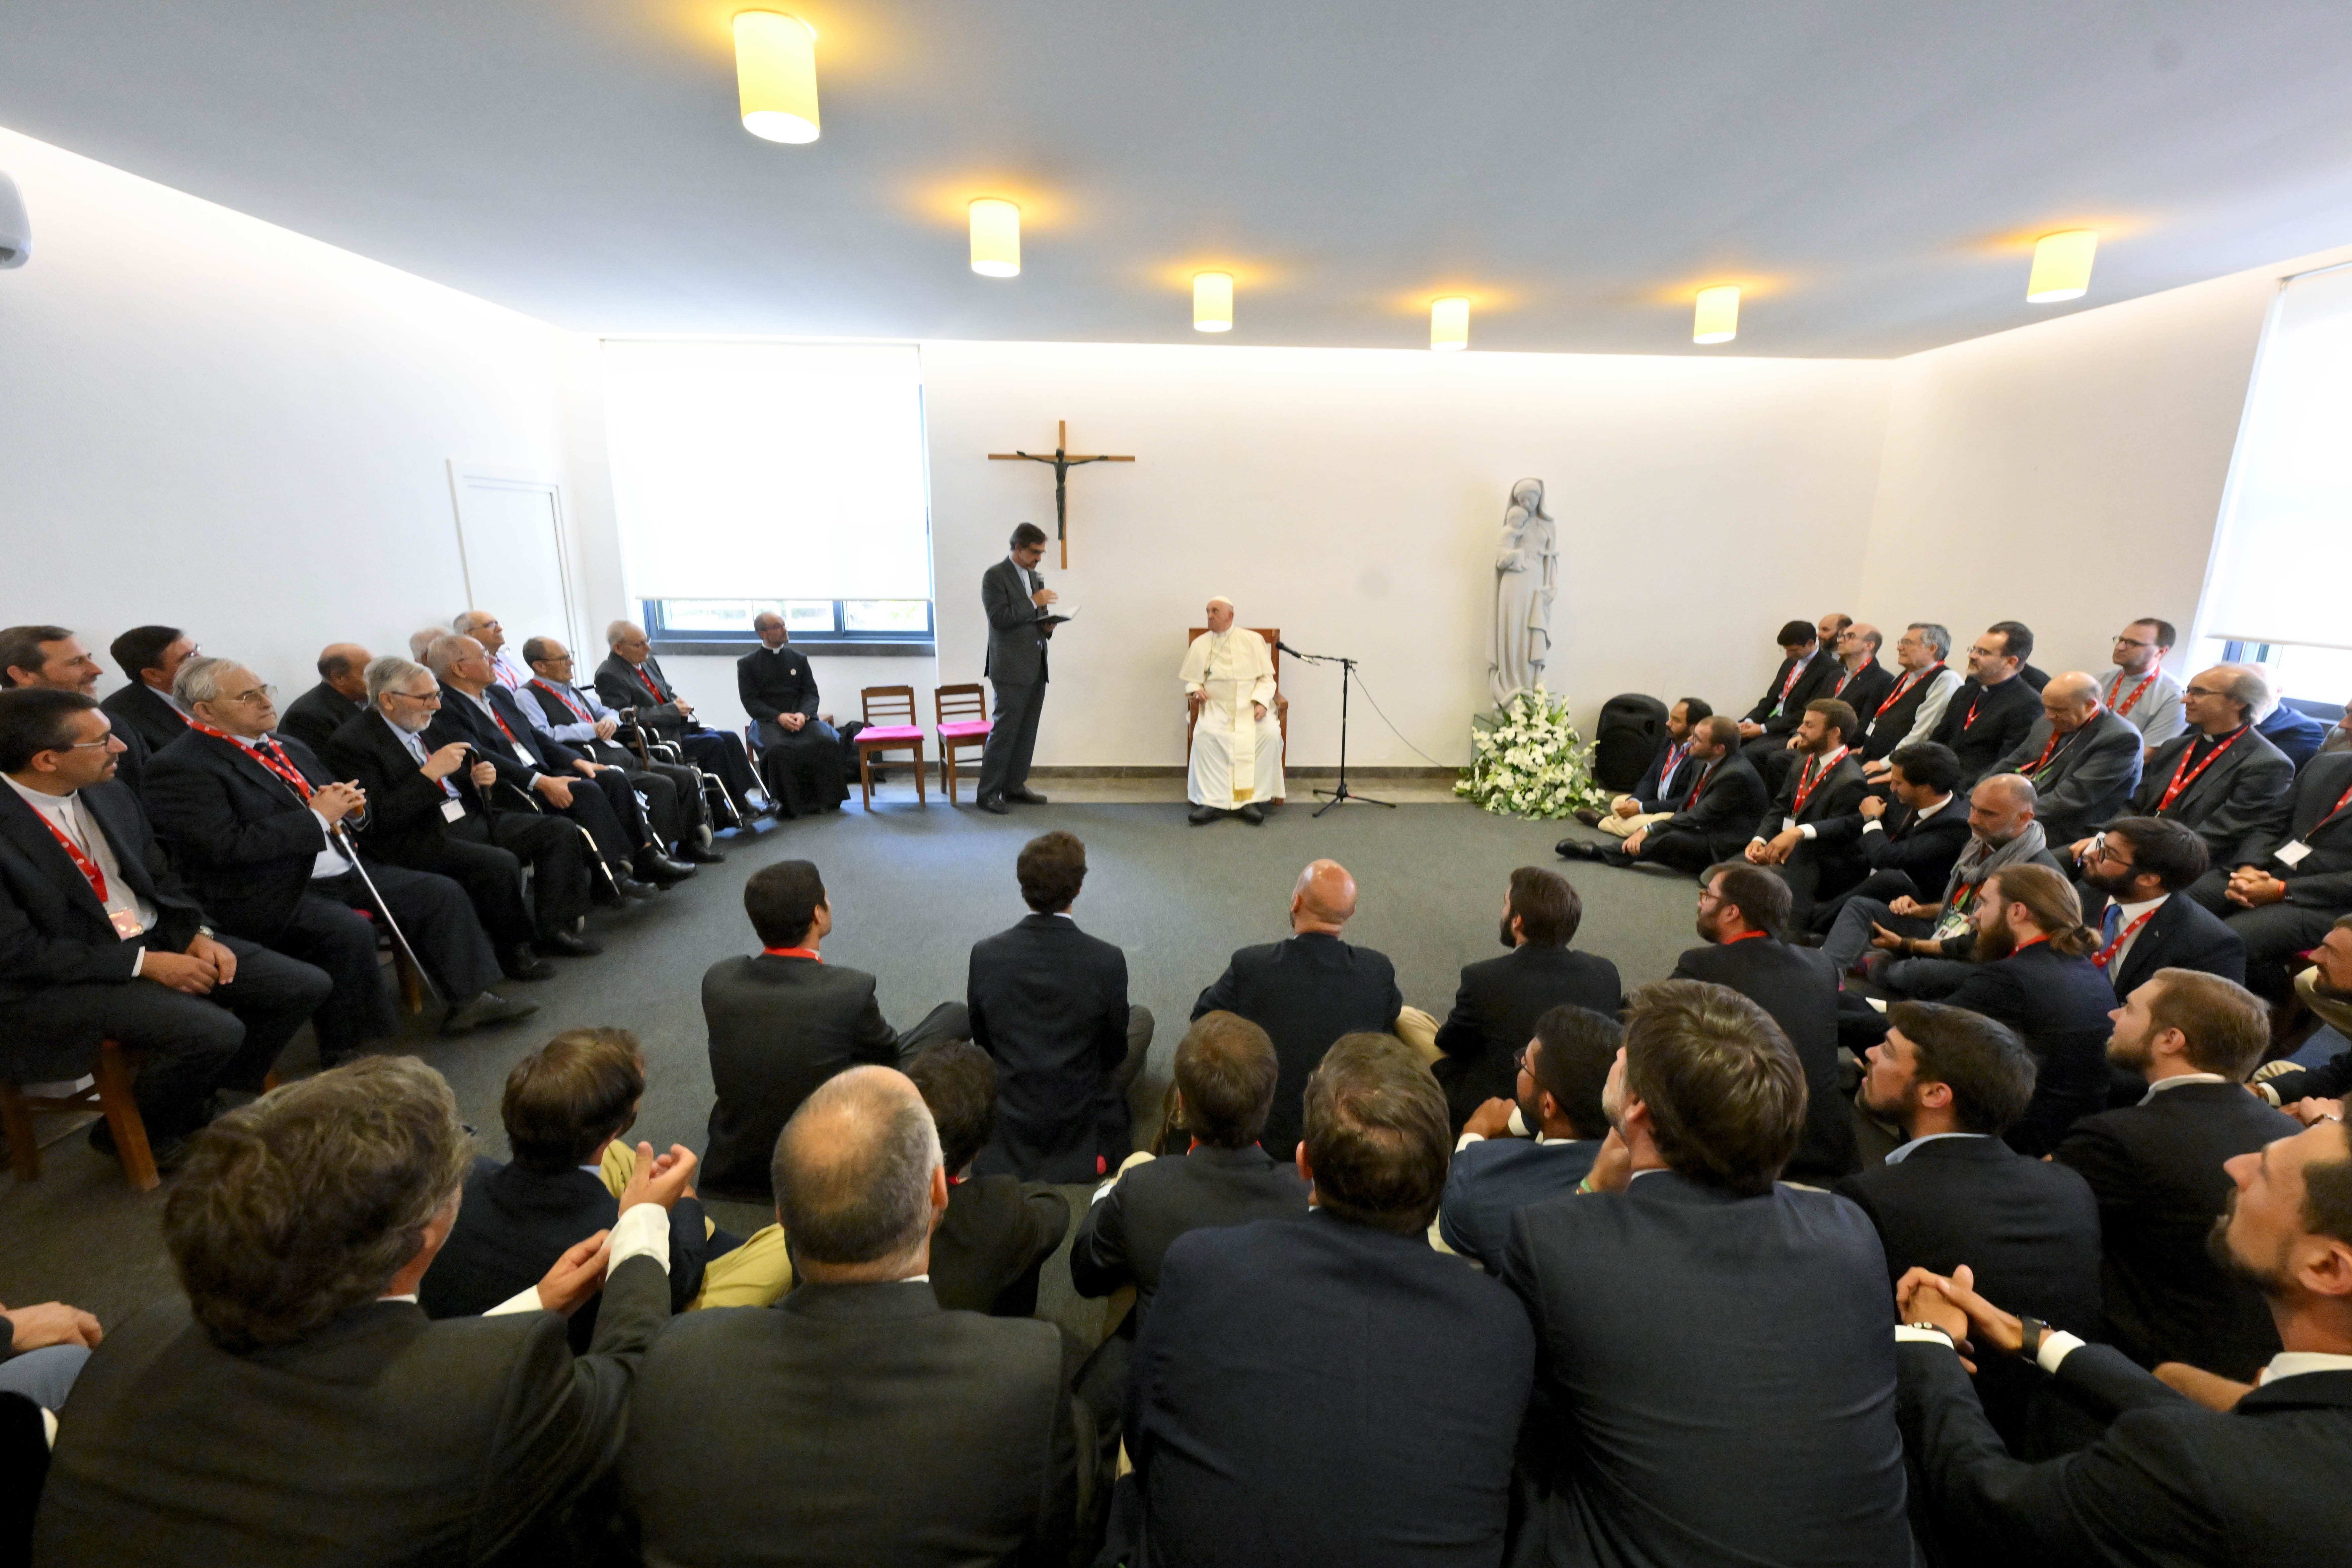 Pope Francis meets with about 90 Jesuits at their St. John de Brito College Aug. 5 in Lisbon, Portugal. (CNS/Vatican Media)